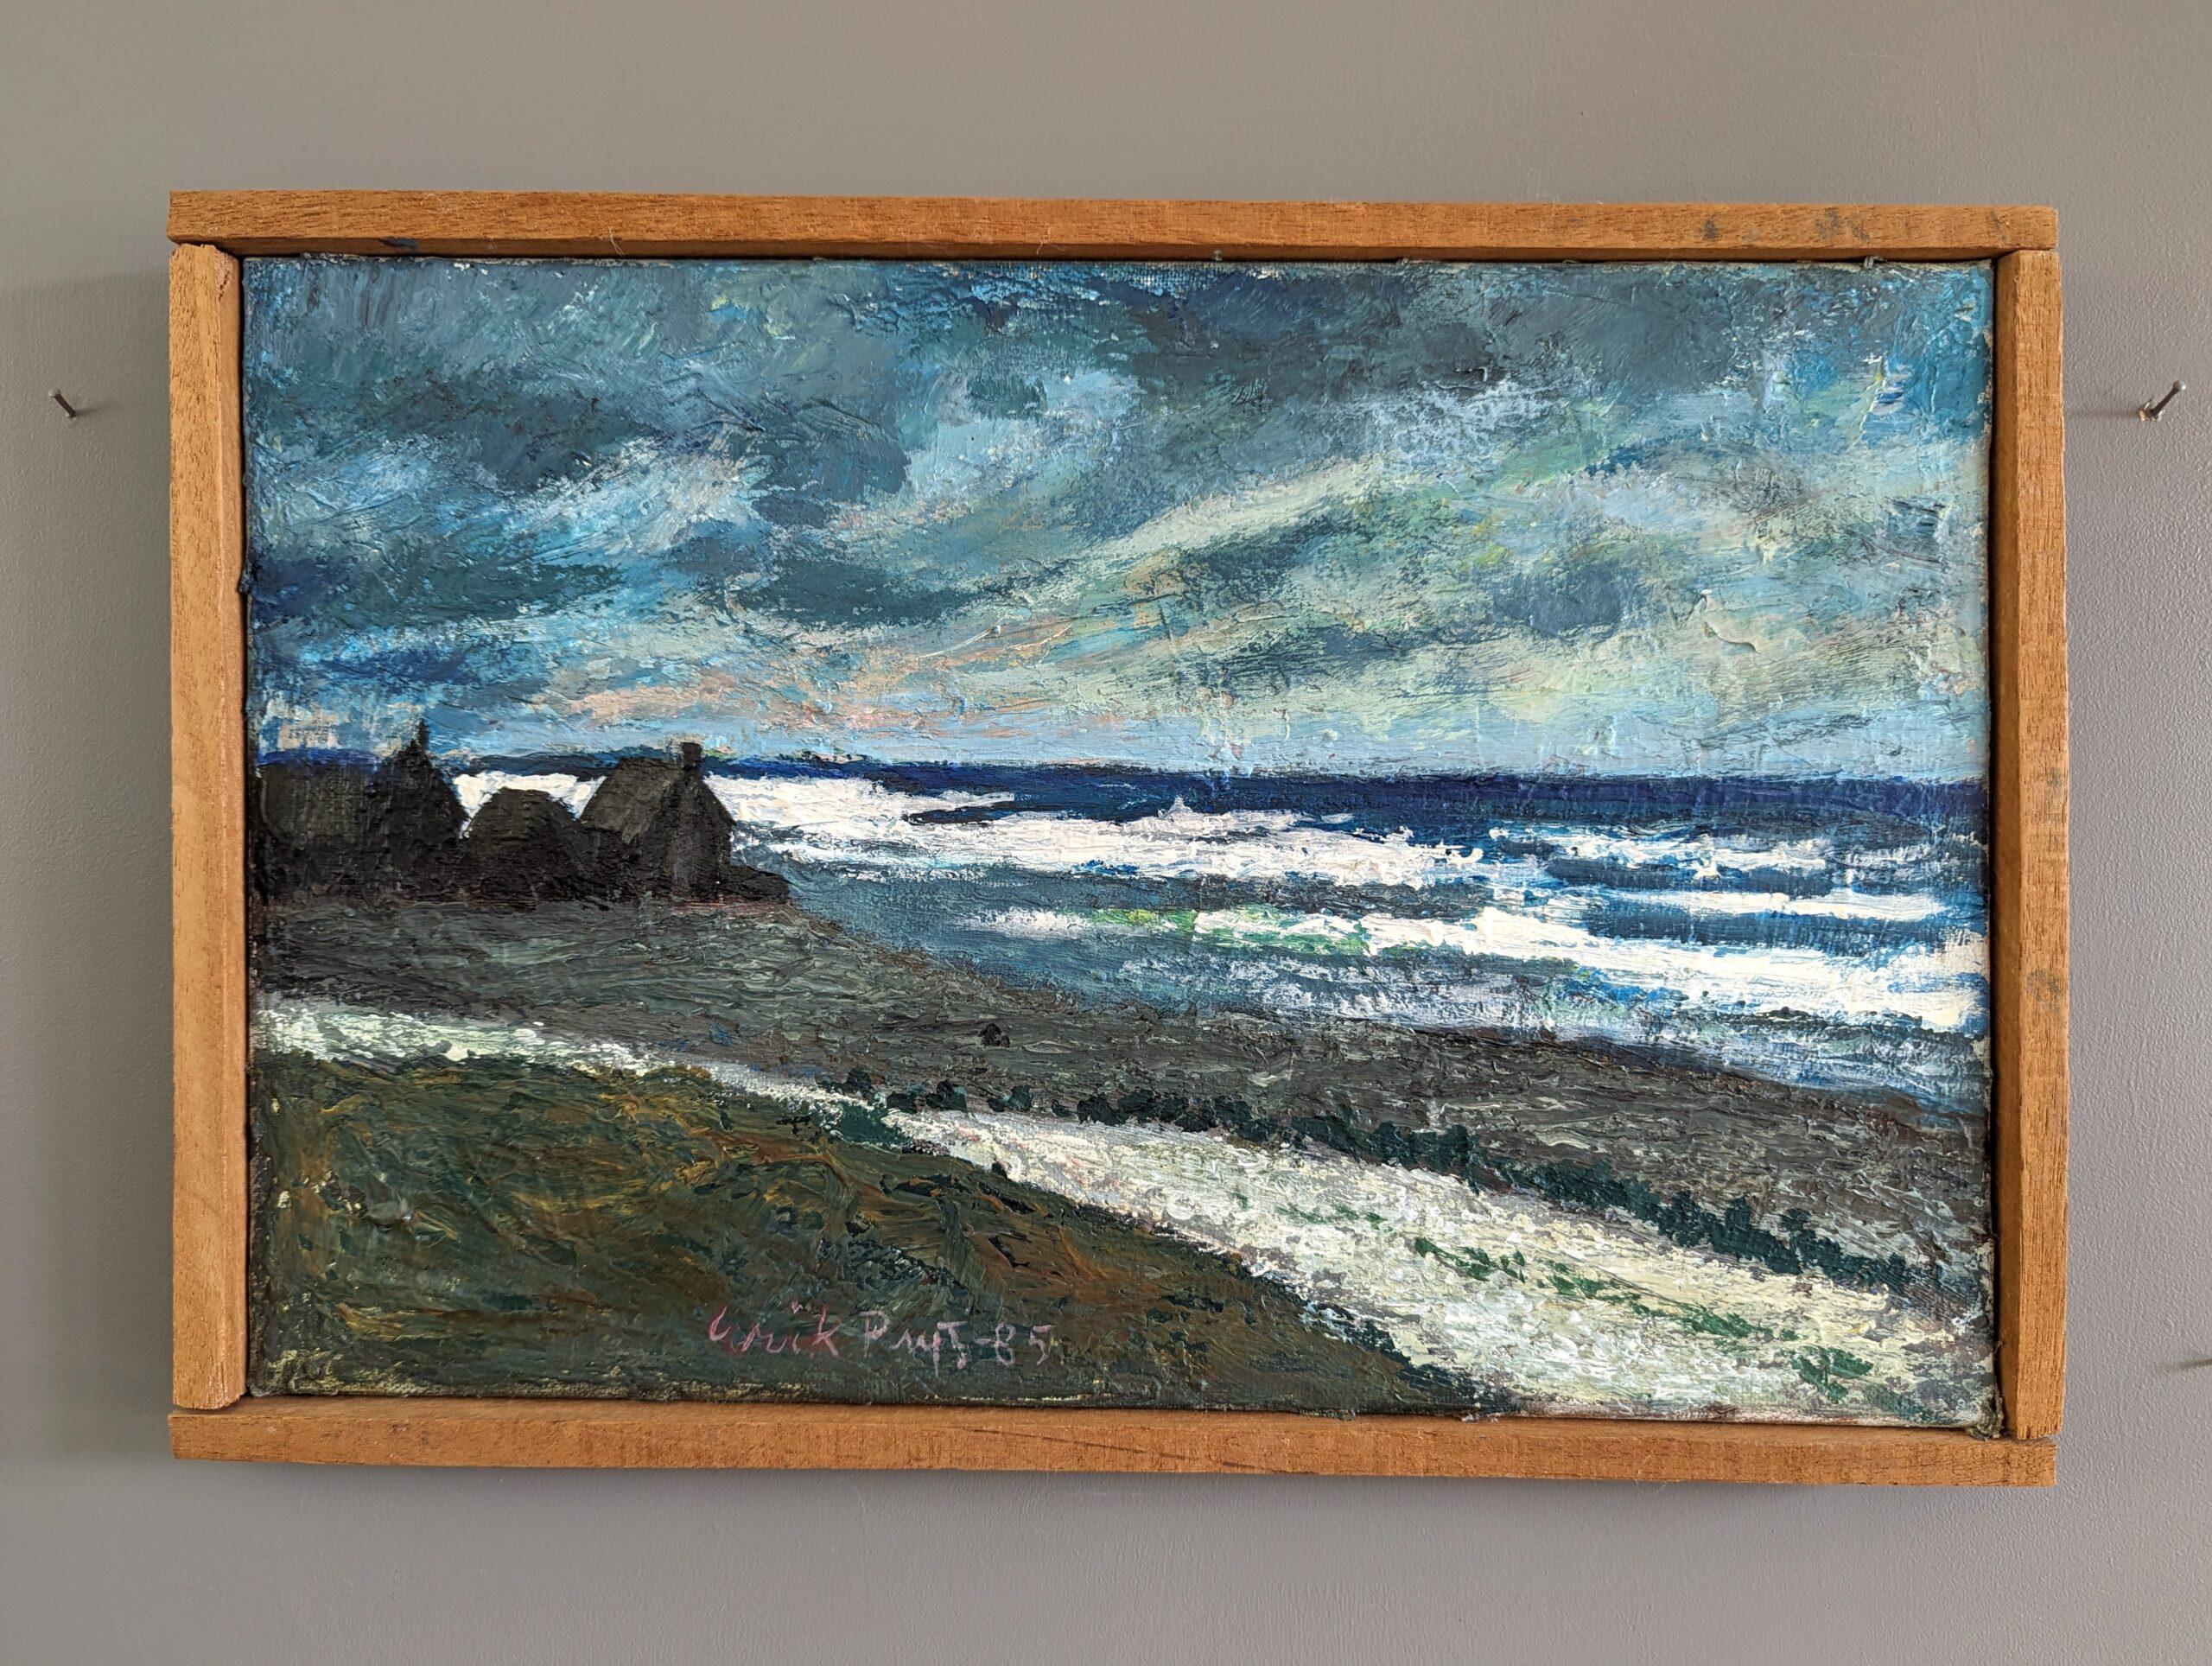 DRAMATIC COAST
Size: 30 x 44 cm (including frame)
Oil on Canvas

A richly textured and coloured modernist seascape in oil, painted onto canvas and dated 1985.

The artist has very effectively captured the dramatic nature of the coastline – from the